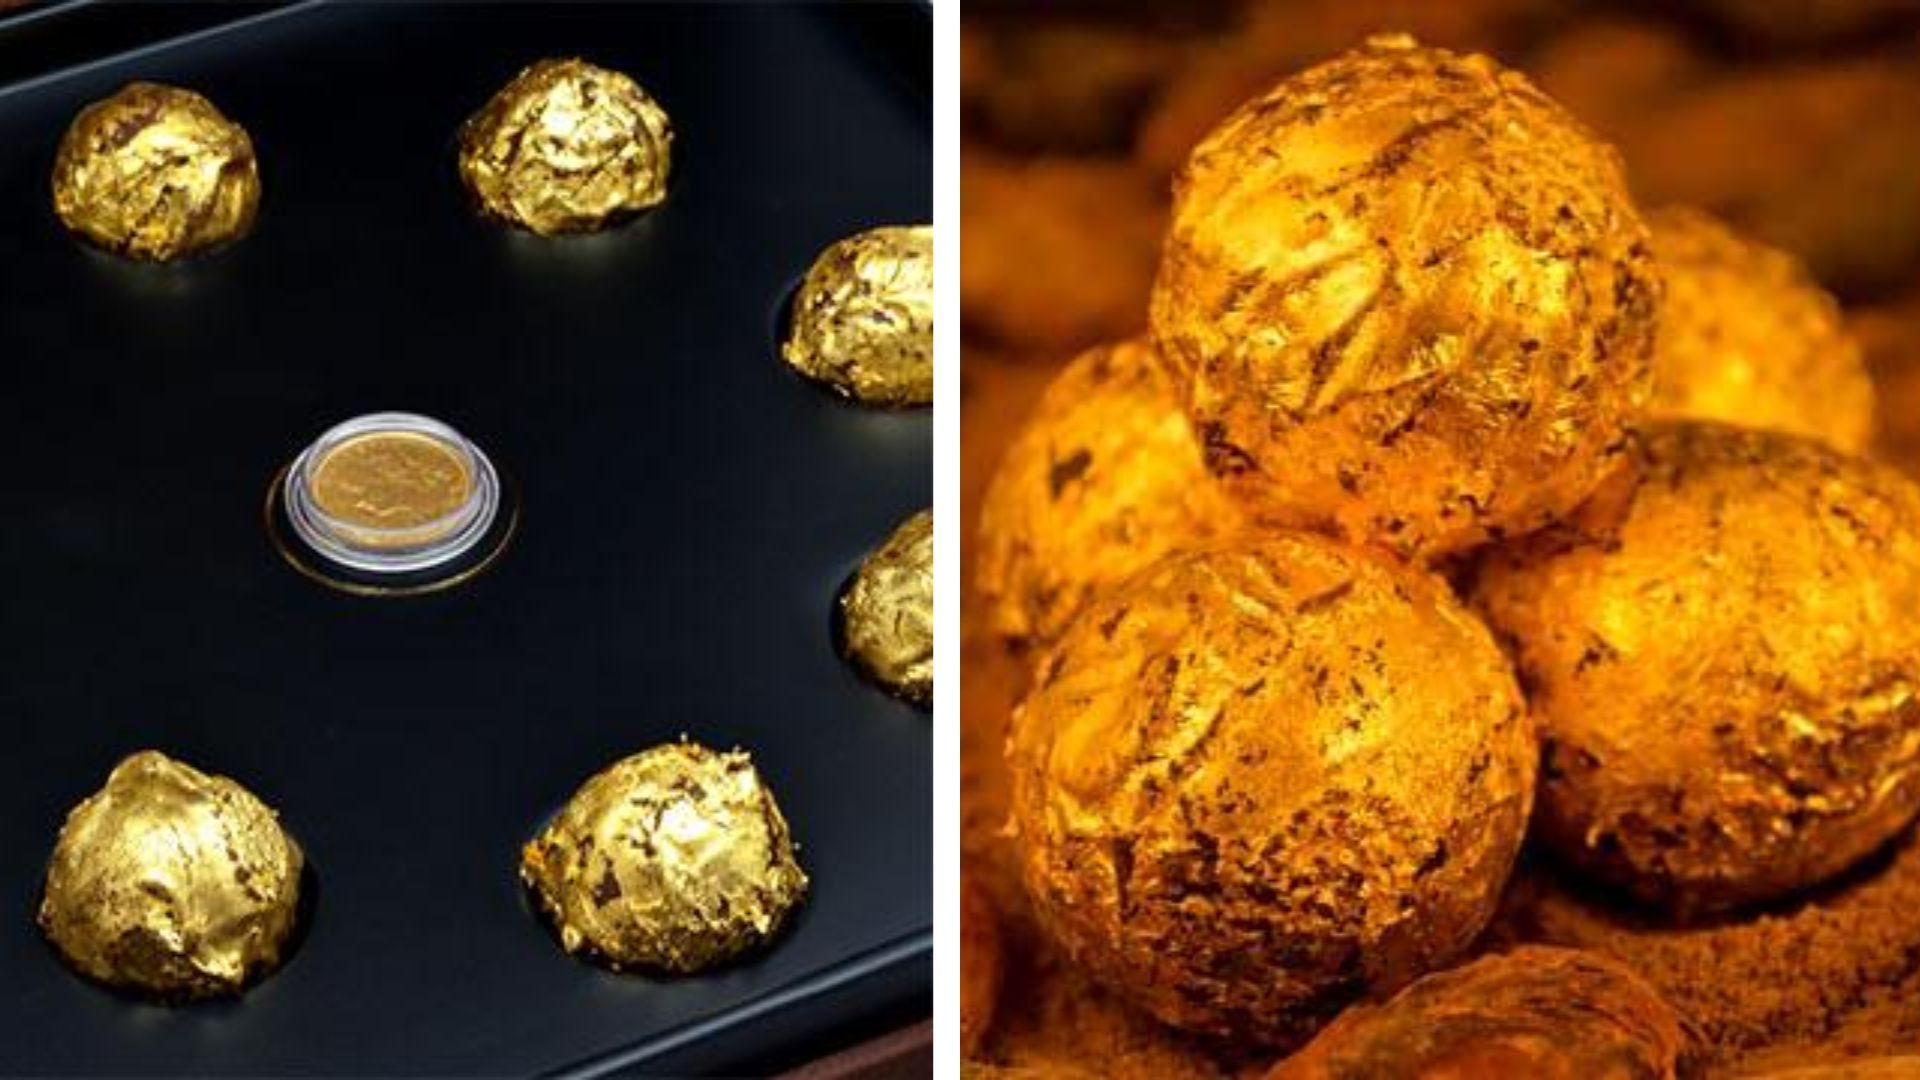 8 of the most expensive chocolate brands in the world